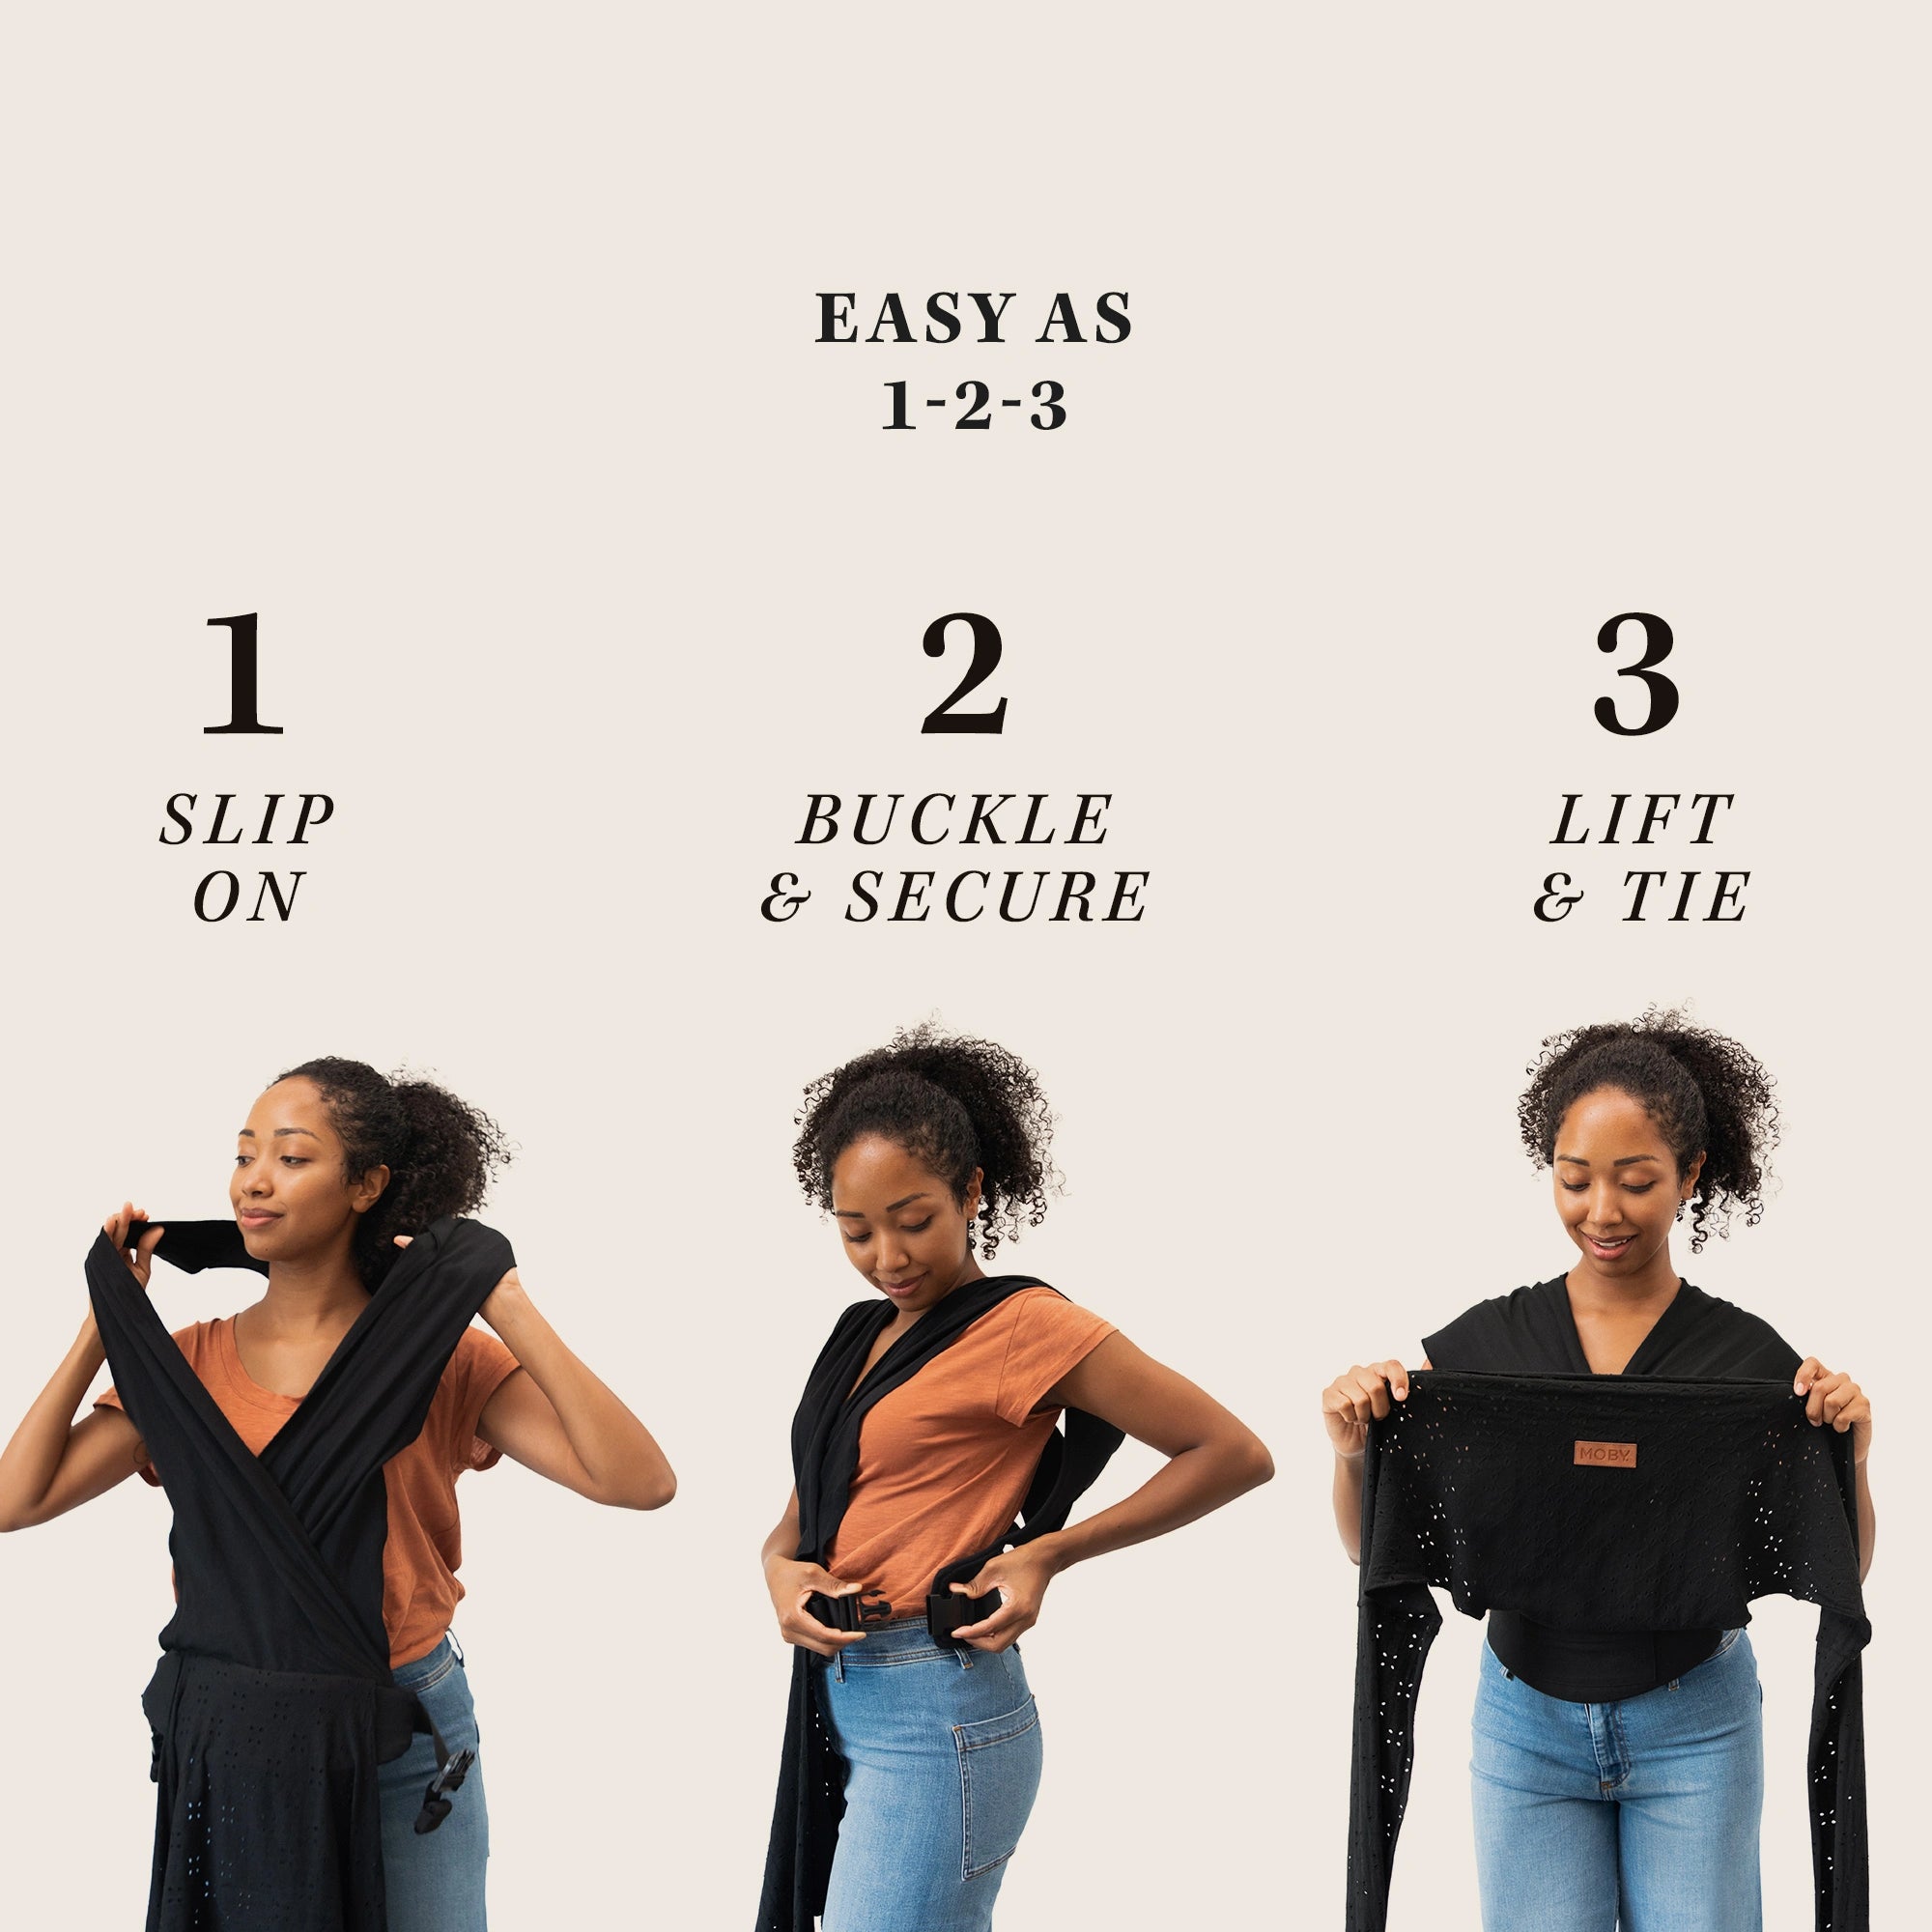 easy-wrap easy as 1-2-3. step 1 slip on, step 2 buckle and secure, step 3 lift and tie 